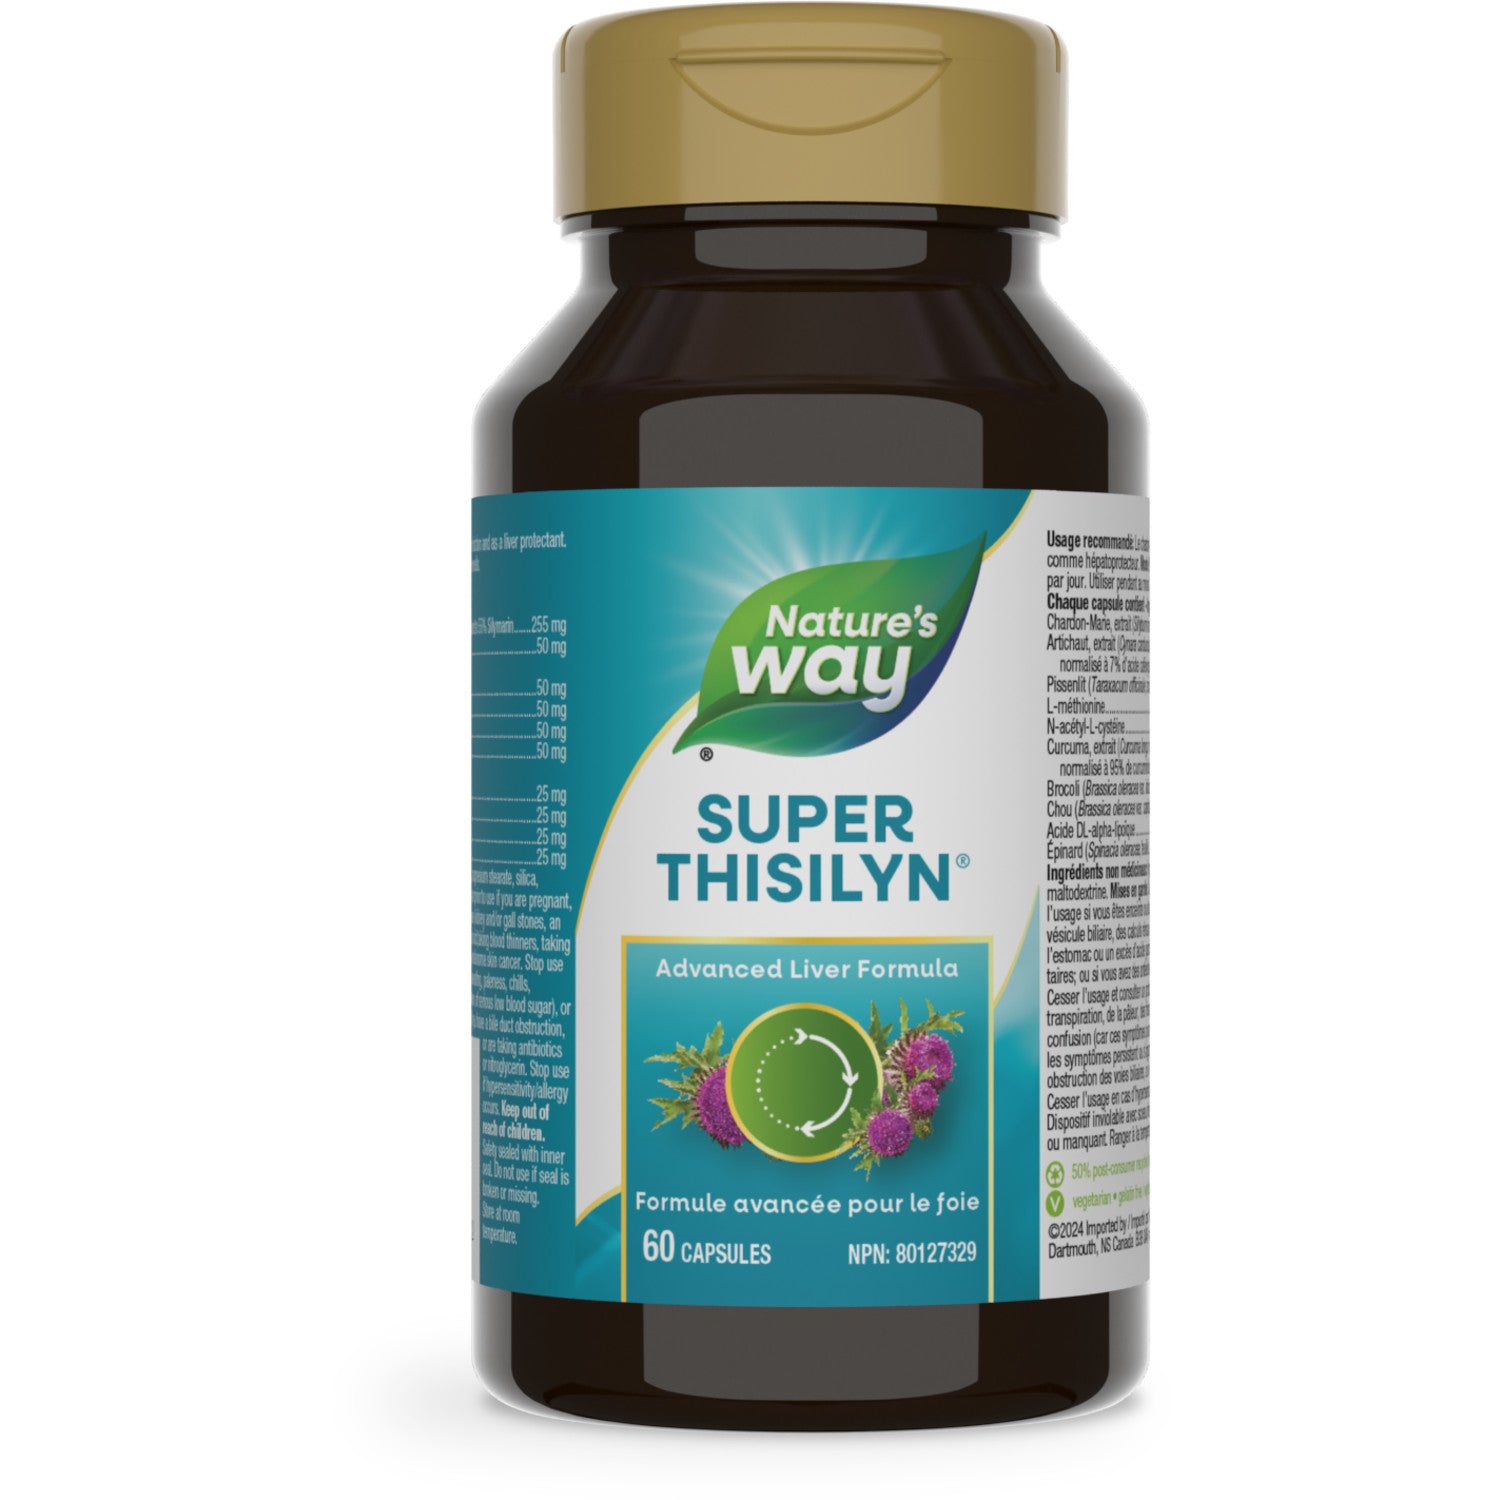 Super Thisilyn® / 60 capsules